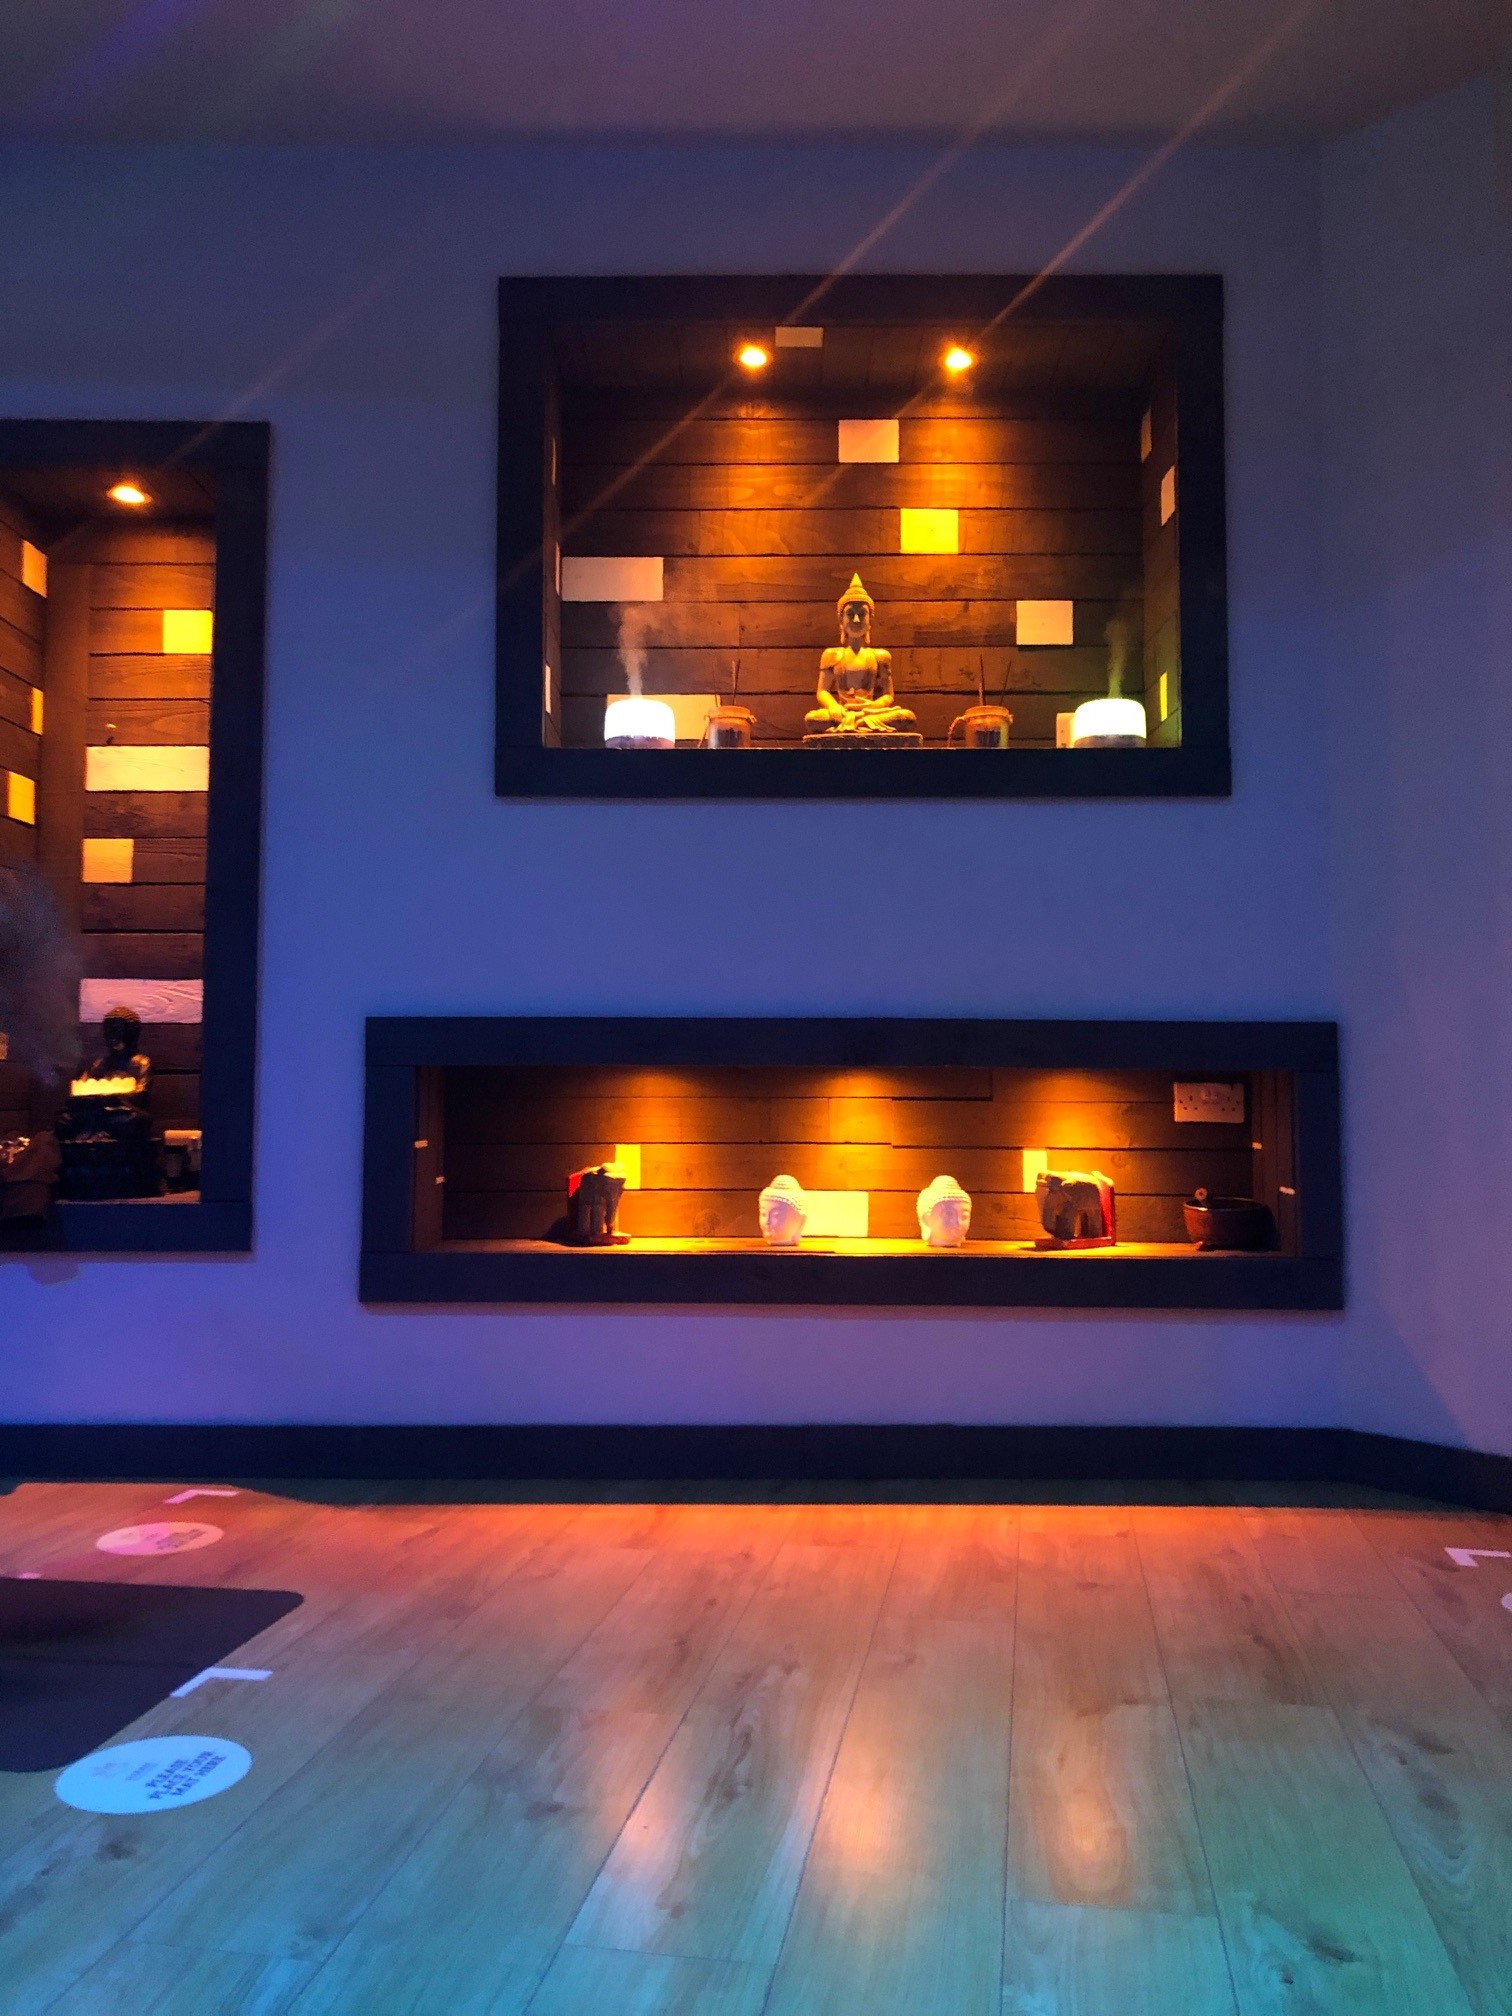 a yoga room with a purple wall containing lit up shelves of buddhist statues